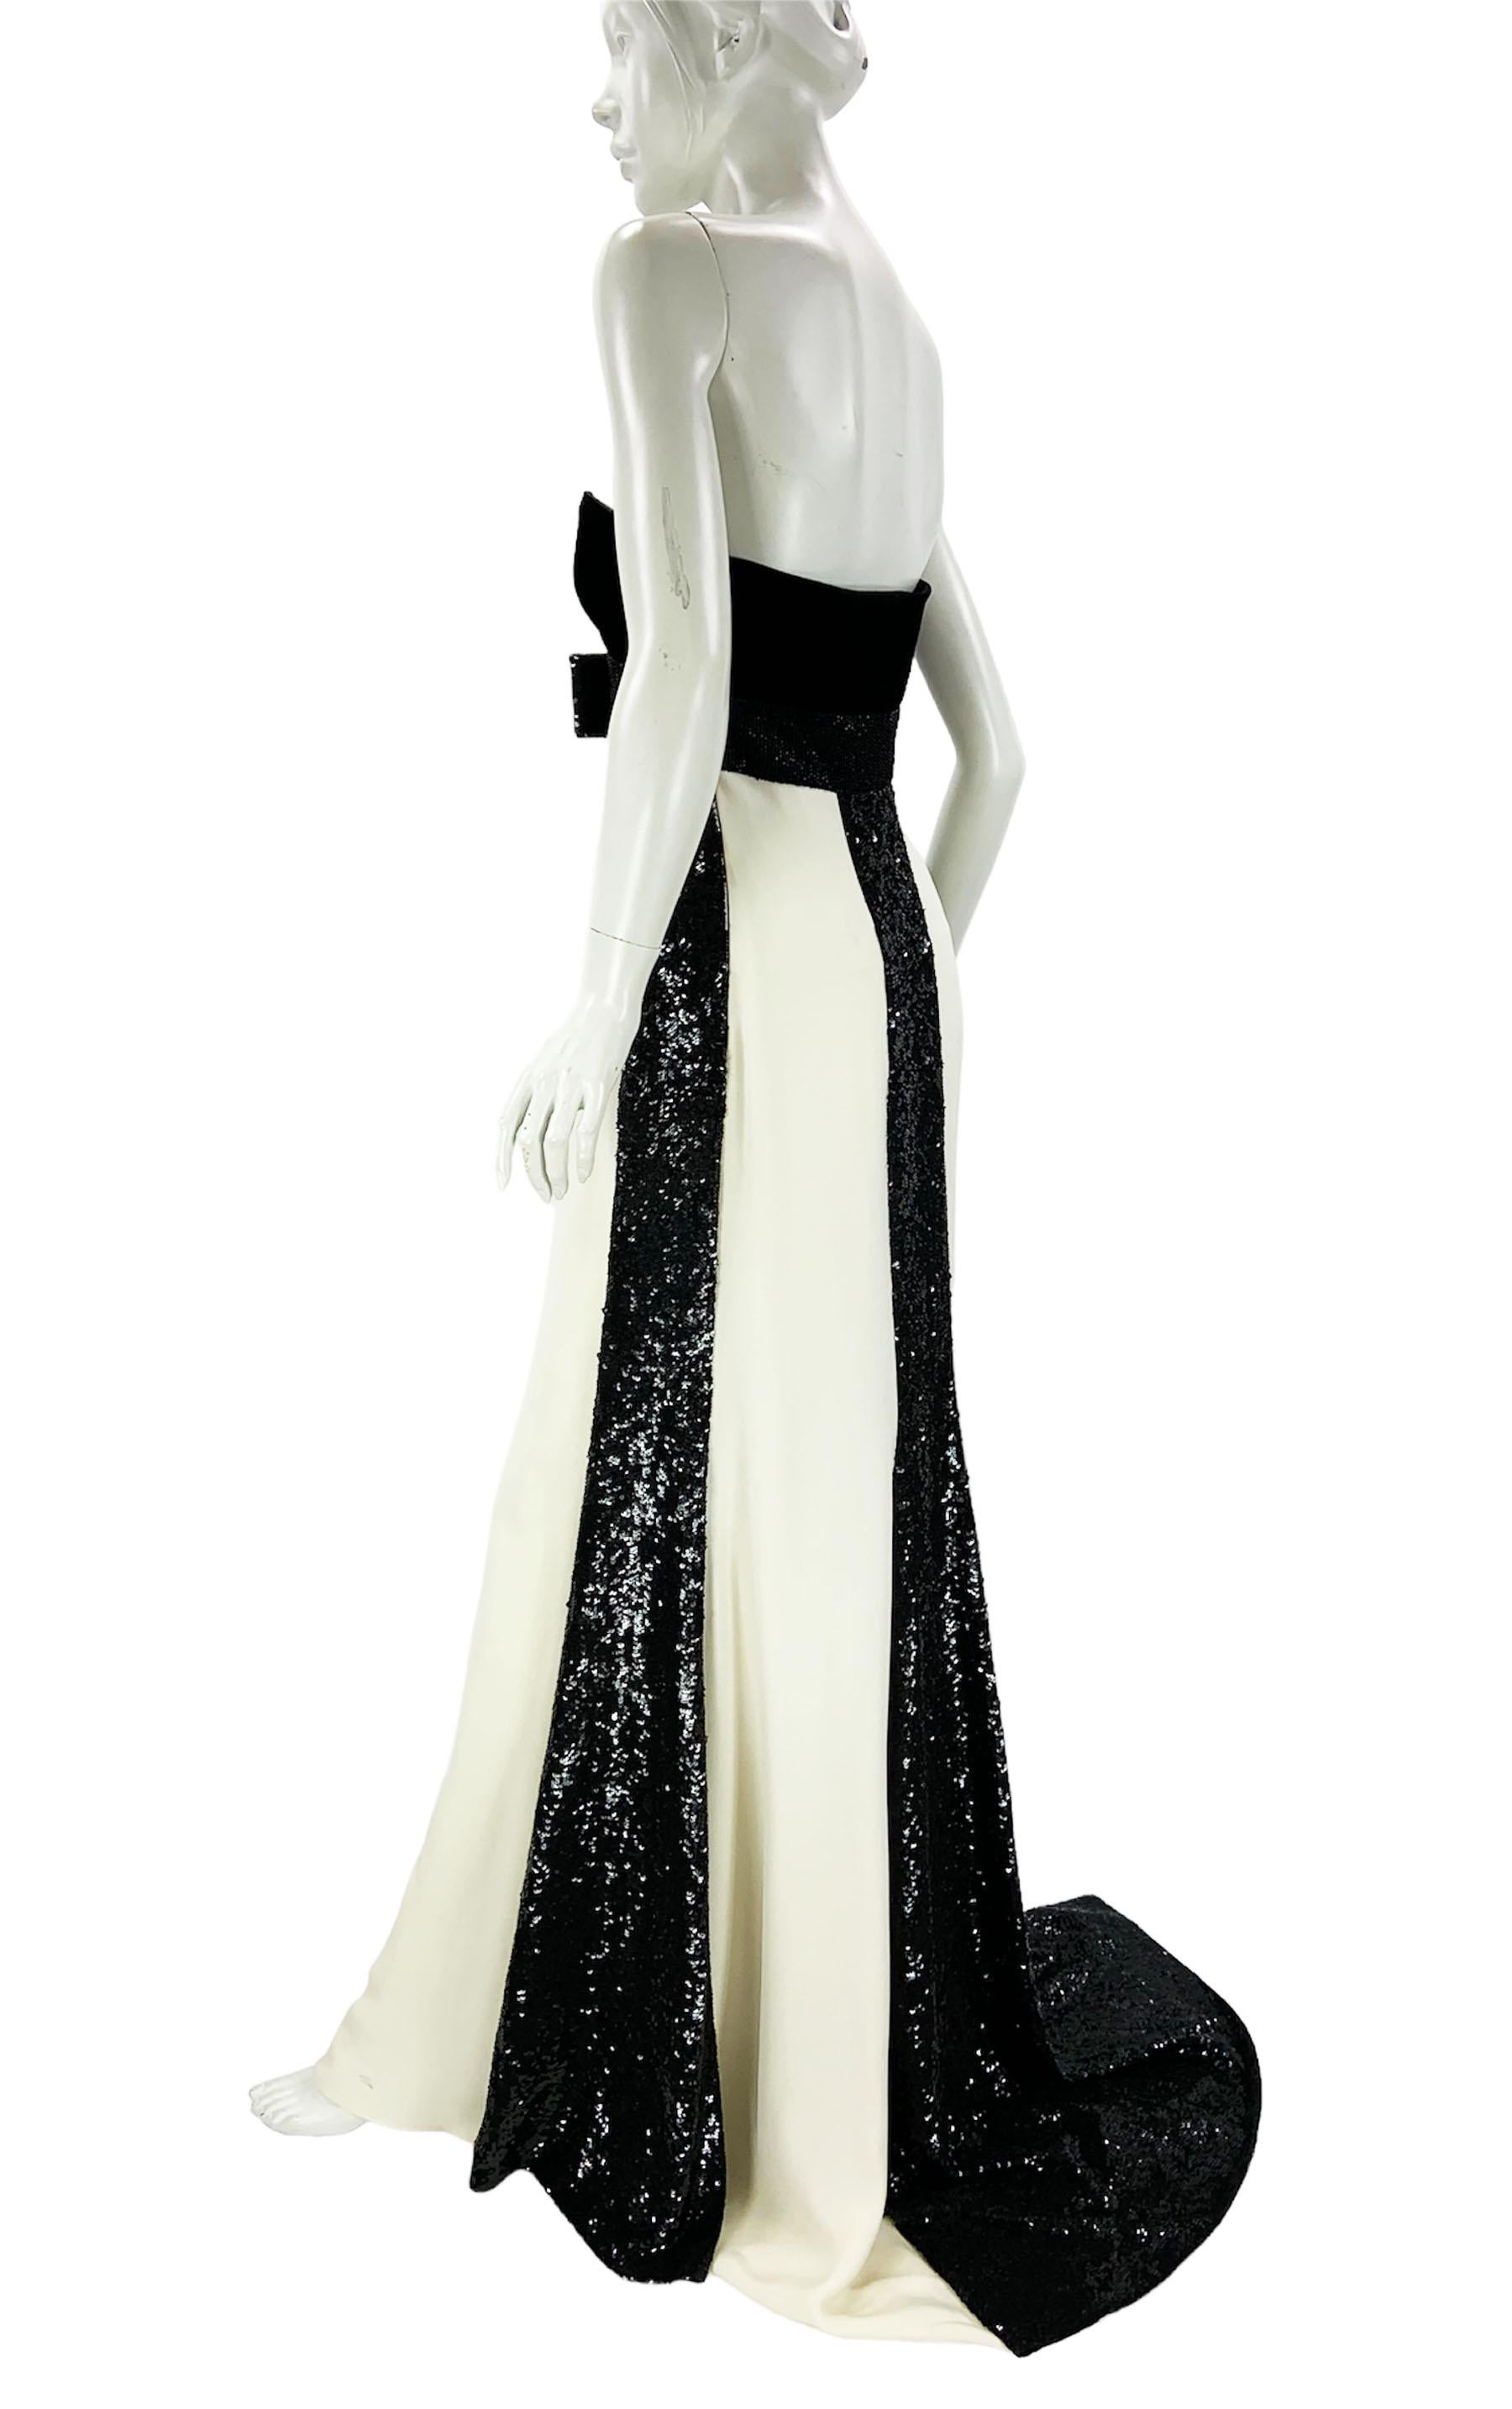 Women's Valentino Runway Red Carpet Black White Bow Accent Embellished Dress Gown US 8